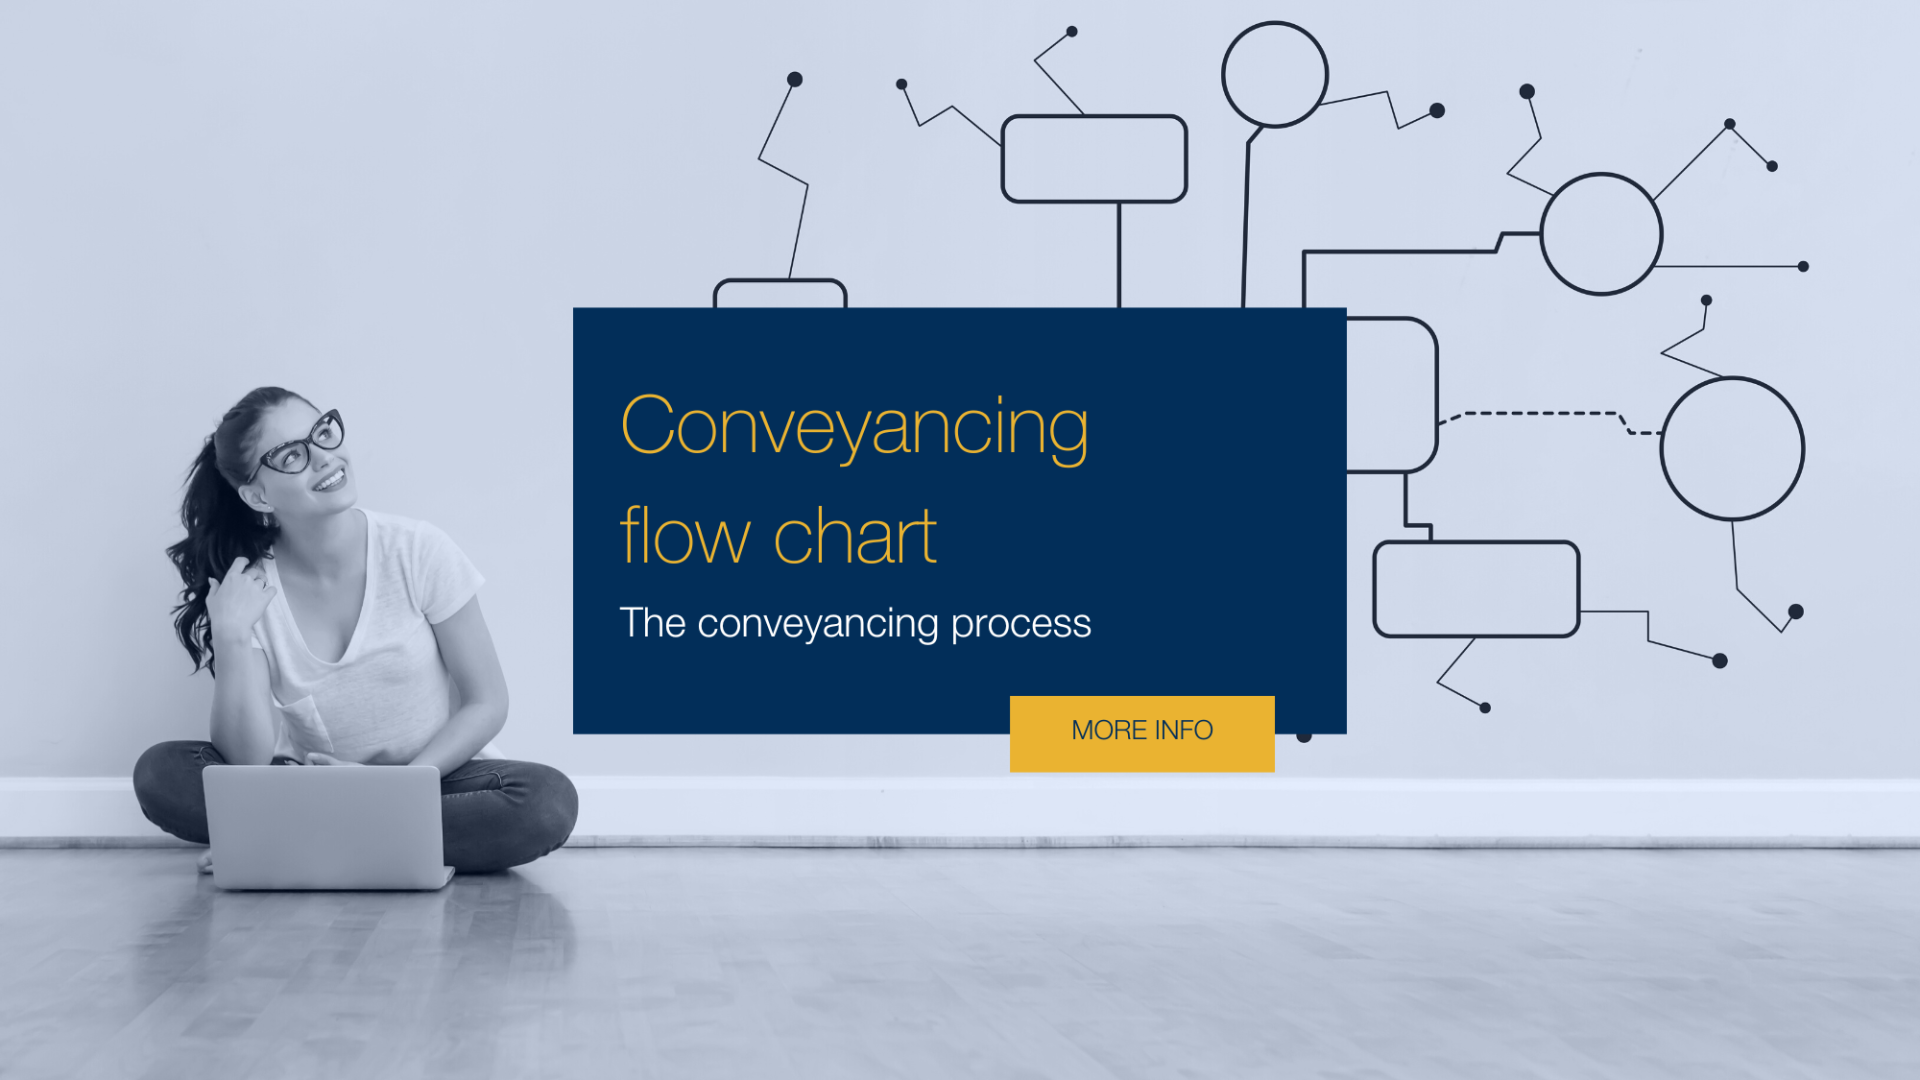 Conveyancing flow chart